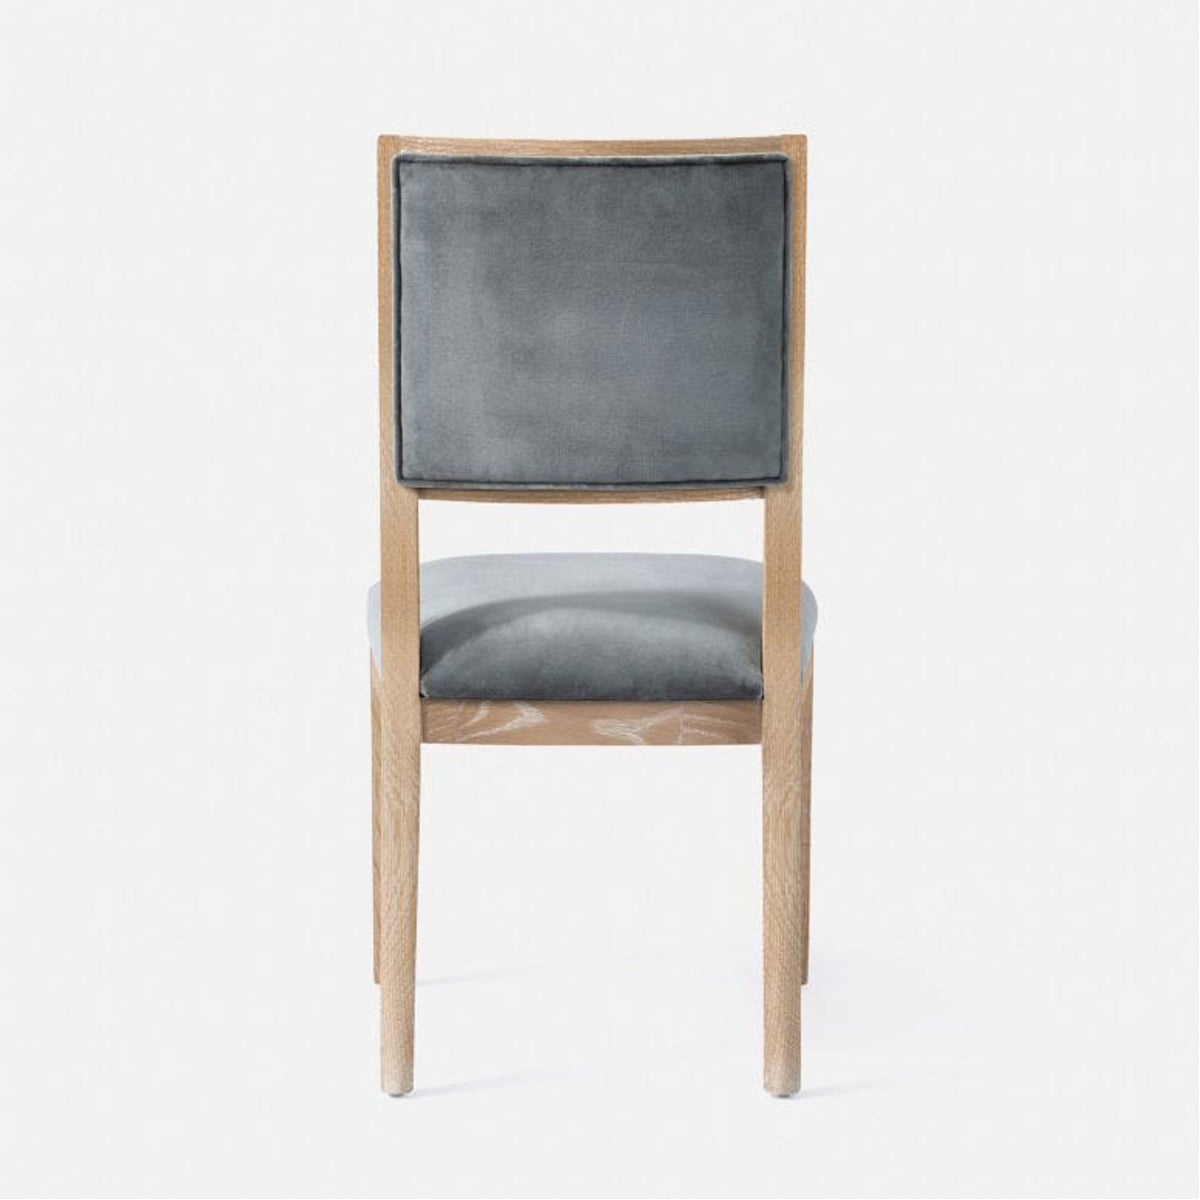 Made Goods Nelton Upholstered Dining Chair in Mondego Cotton Jute